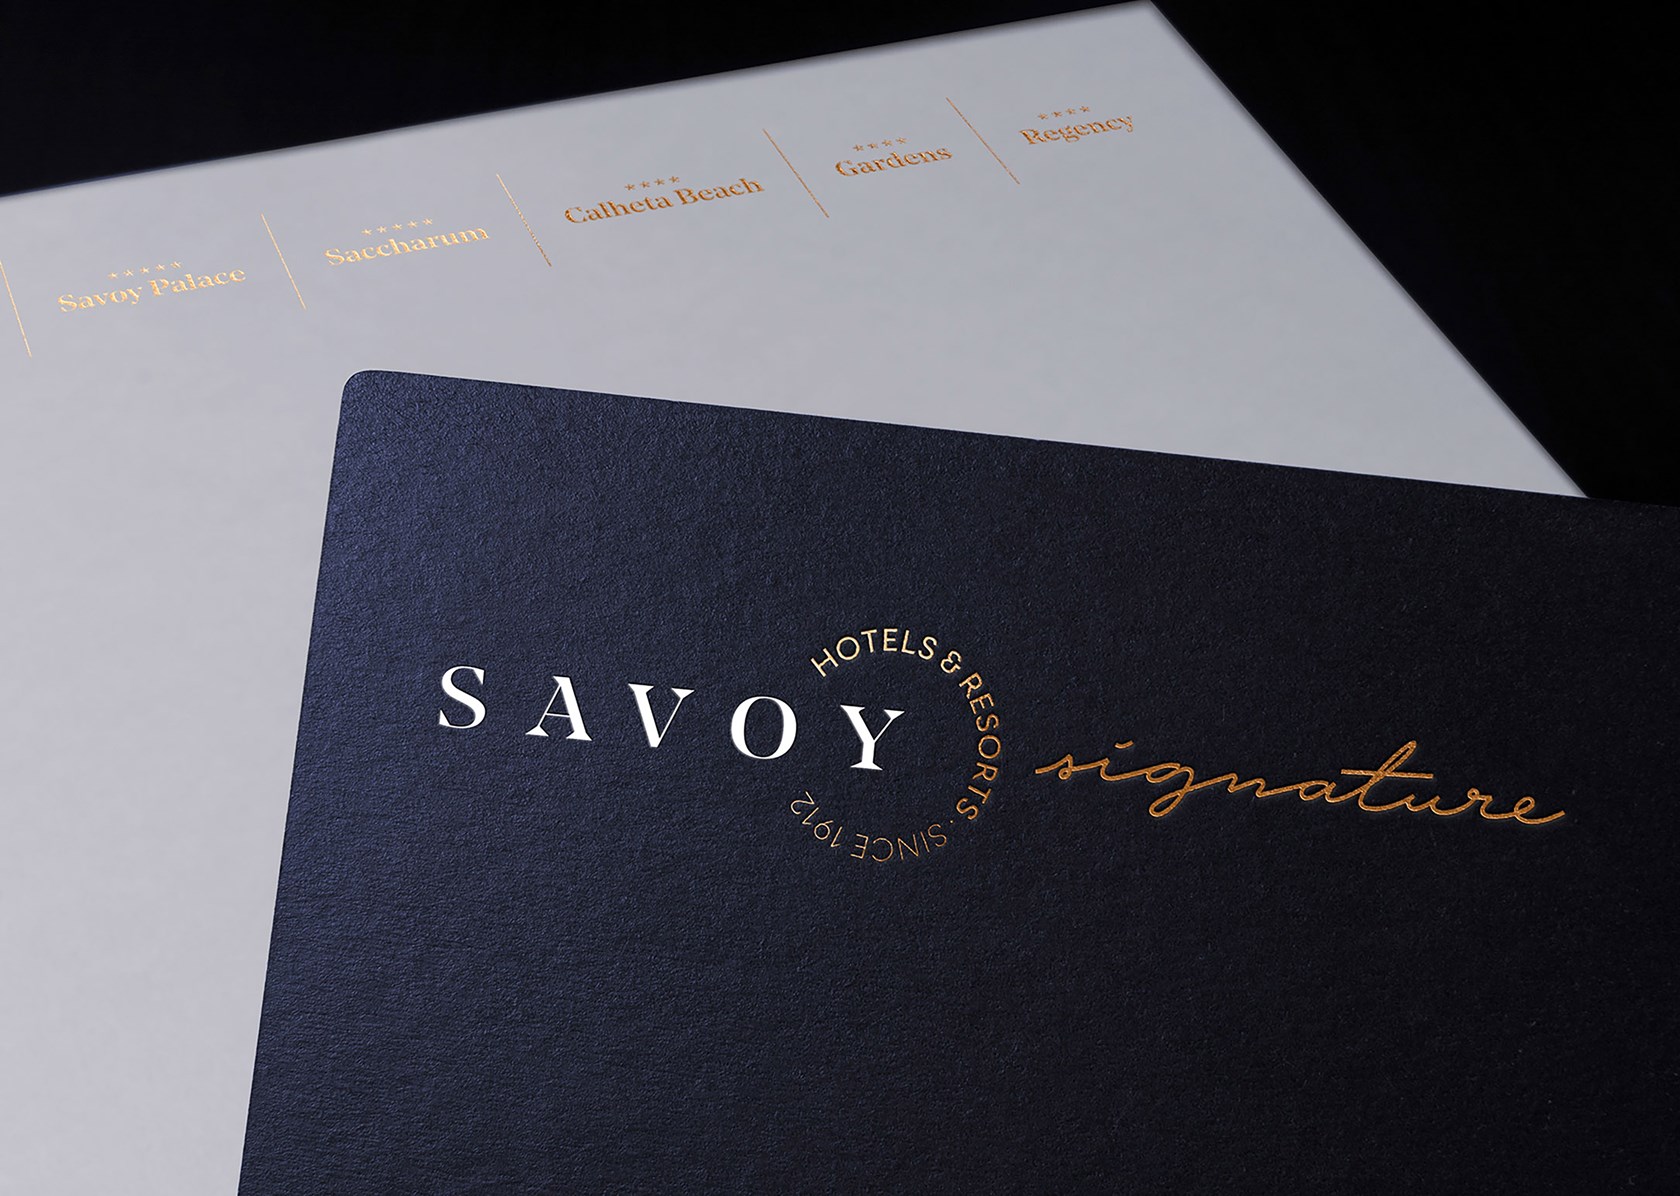 SAVOY Signature — 
Once upon a name